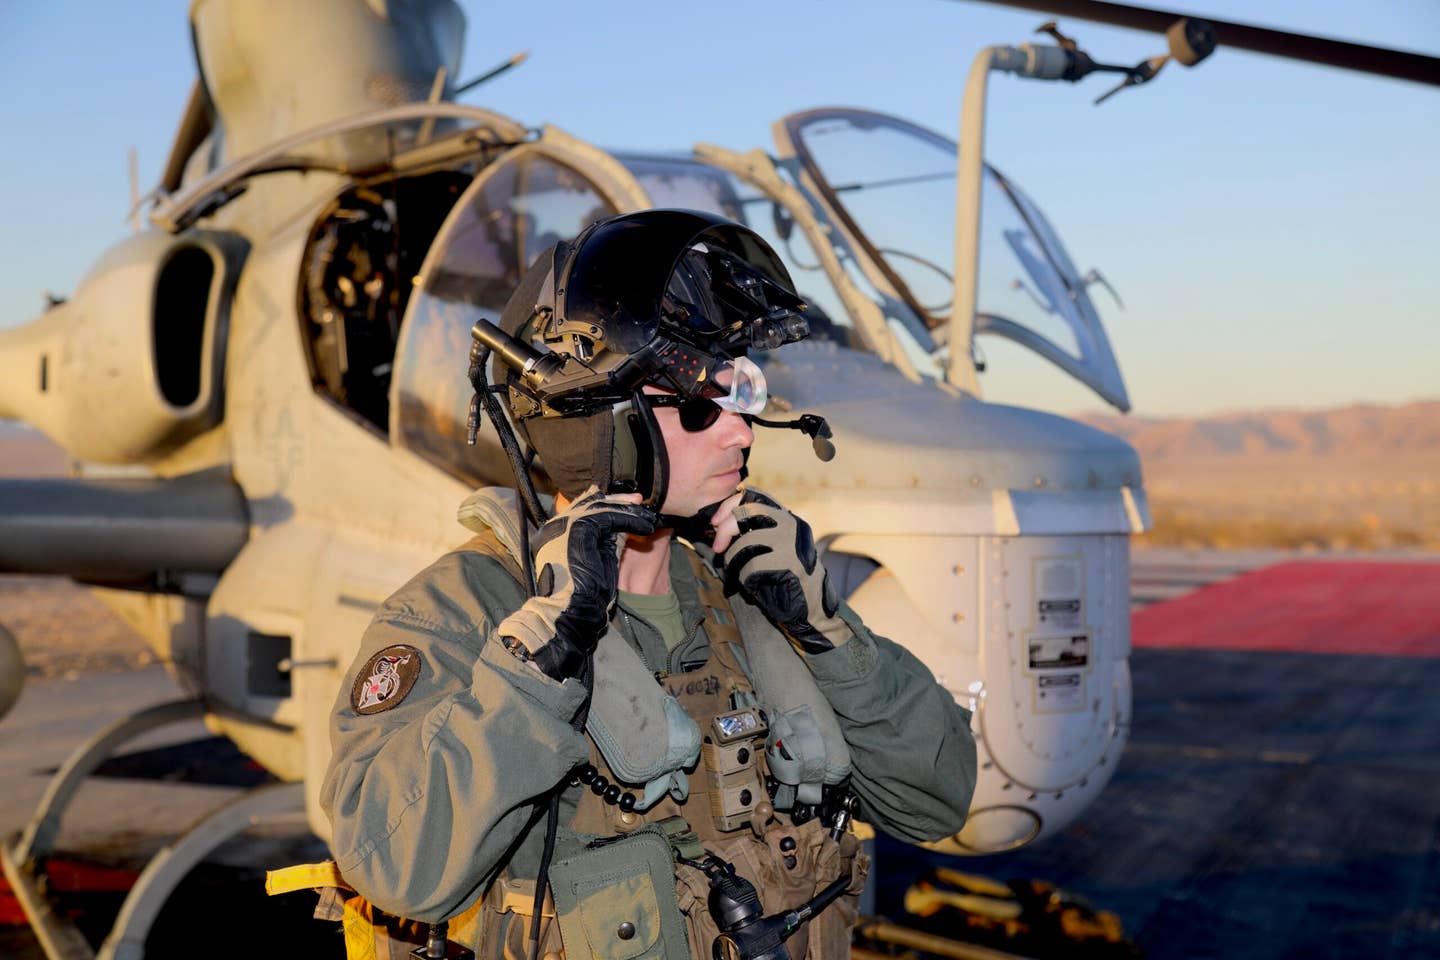 The AH-1Z is set to get much smarter and more aware. Here a pilot adjusts his helmet-mounted display that projects flight data as well as tactical information in front of his eye. (Author)